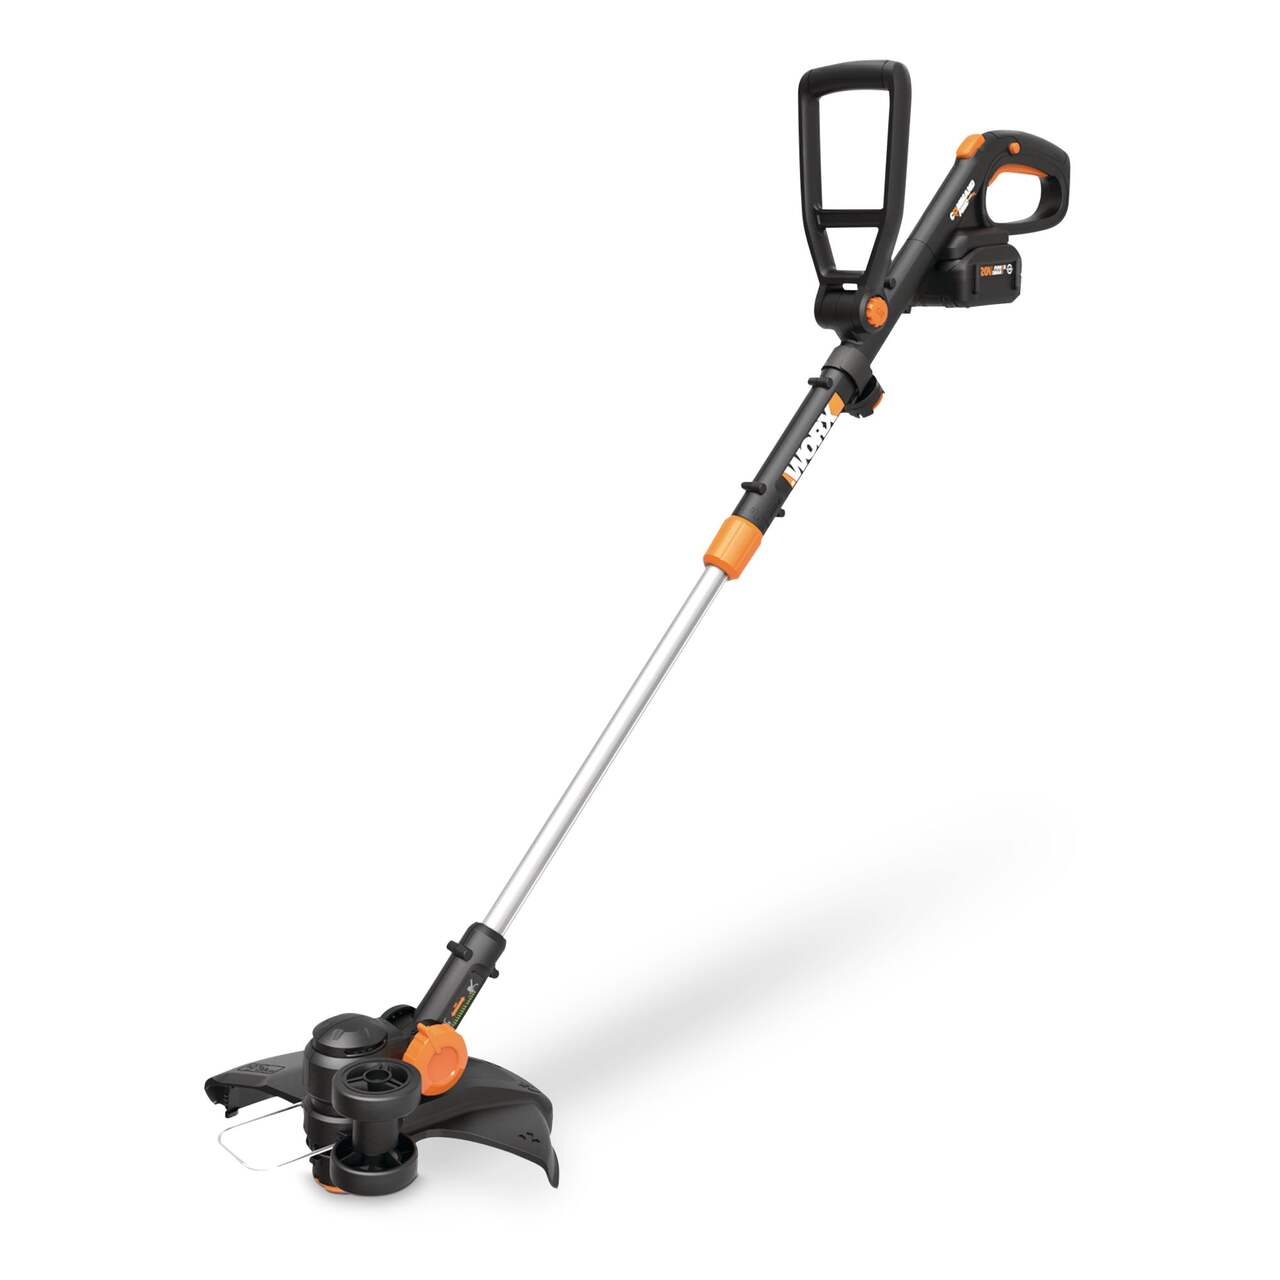 https://media-www.canadiantire.ca/product/seasonal-gardening/outdoor-tools/hand-held-outdoor-power-tools/0601798/worx-20v-grass-trimmer-with-4ah-battery-1a582631-ae55-4228-a840-ad32b88624cb-jpgrendition.jpg?imdensity=1&imwidth=640&impolicy=mZoom